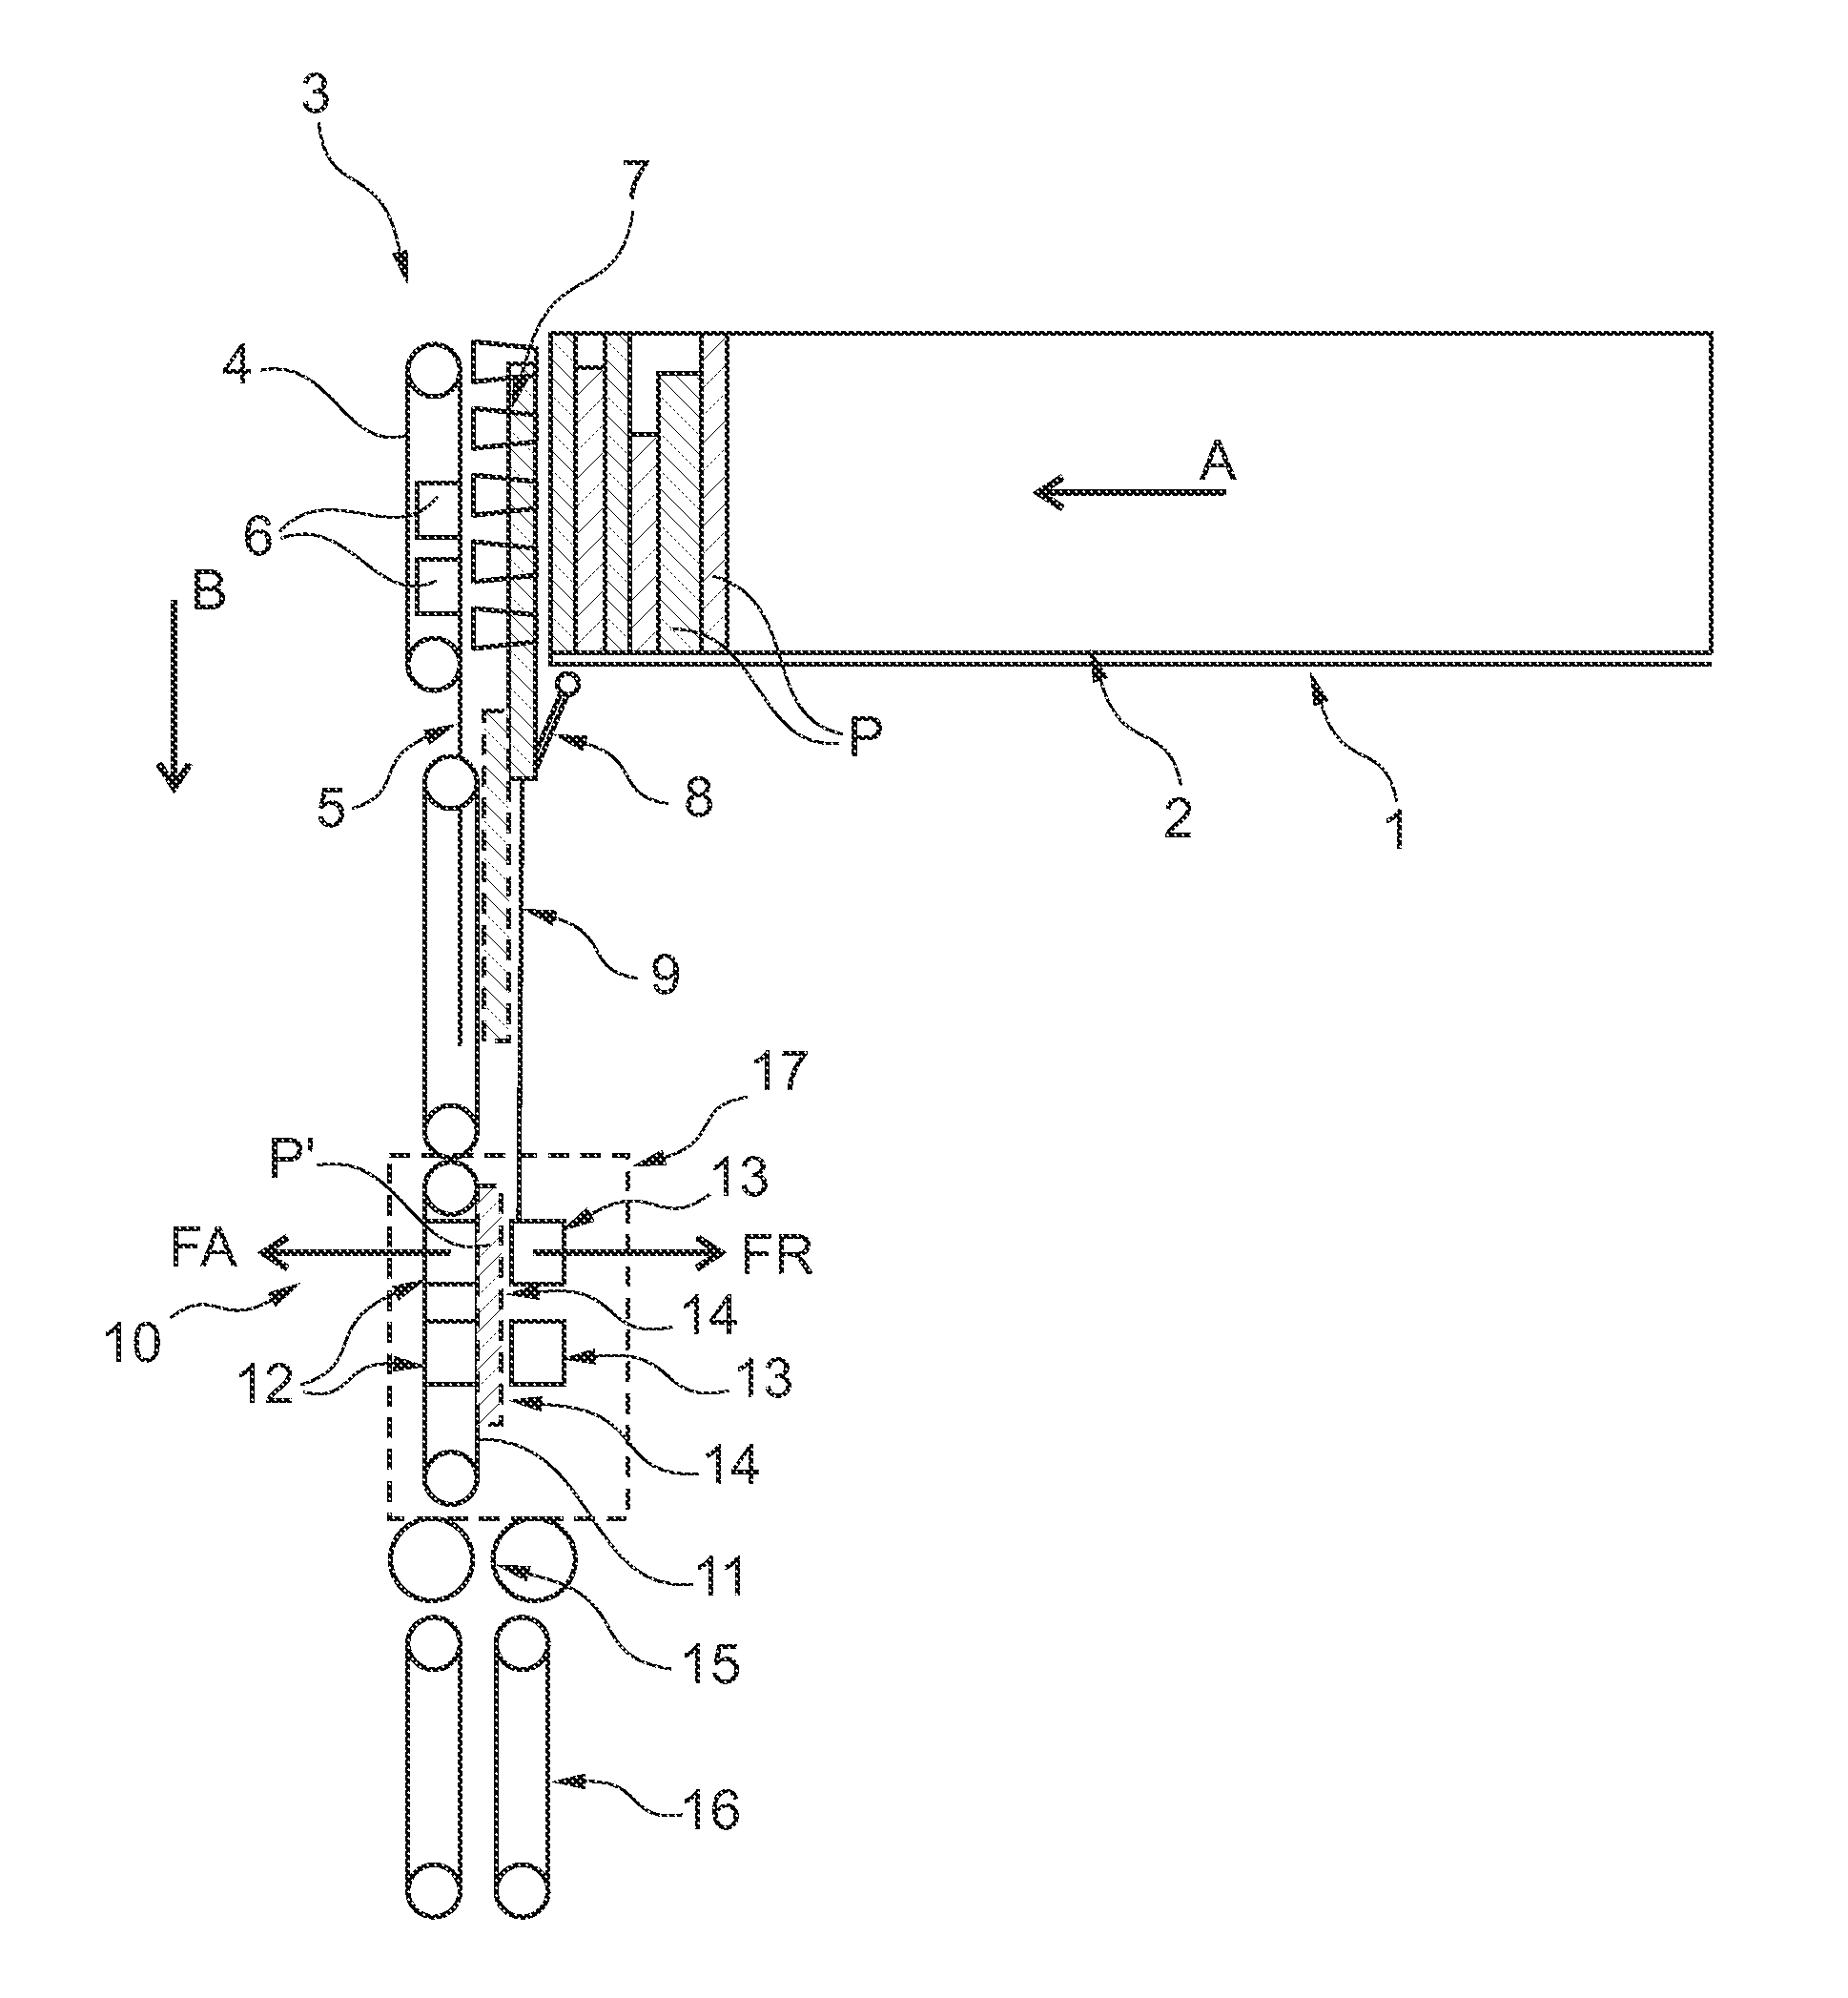 Flat-article feed device and a postal sorting machine